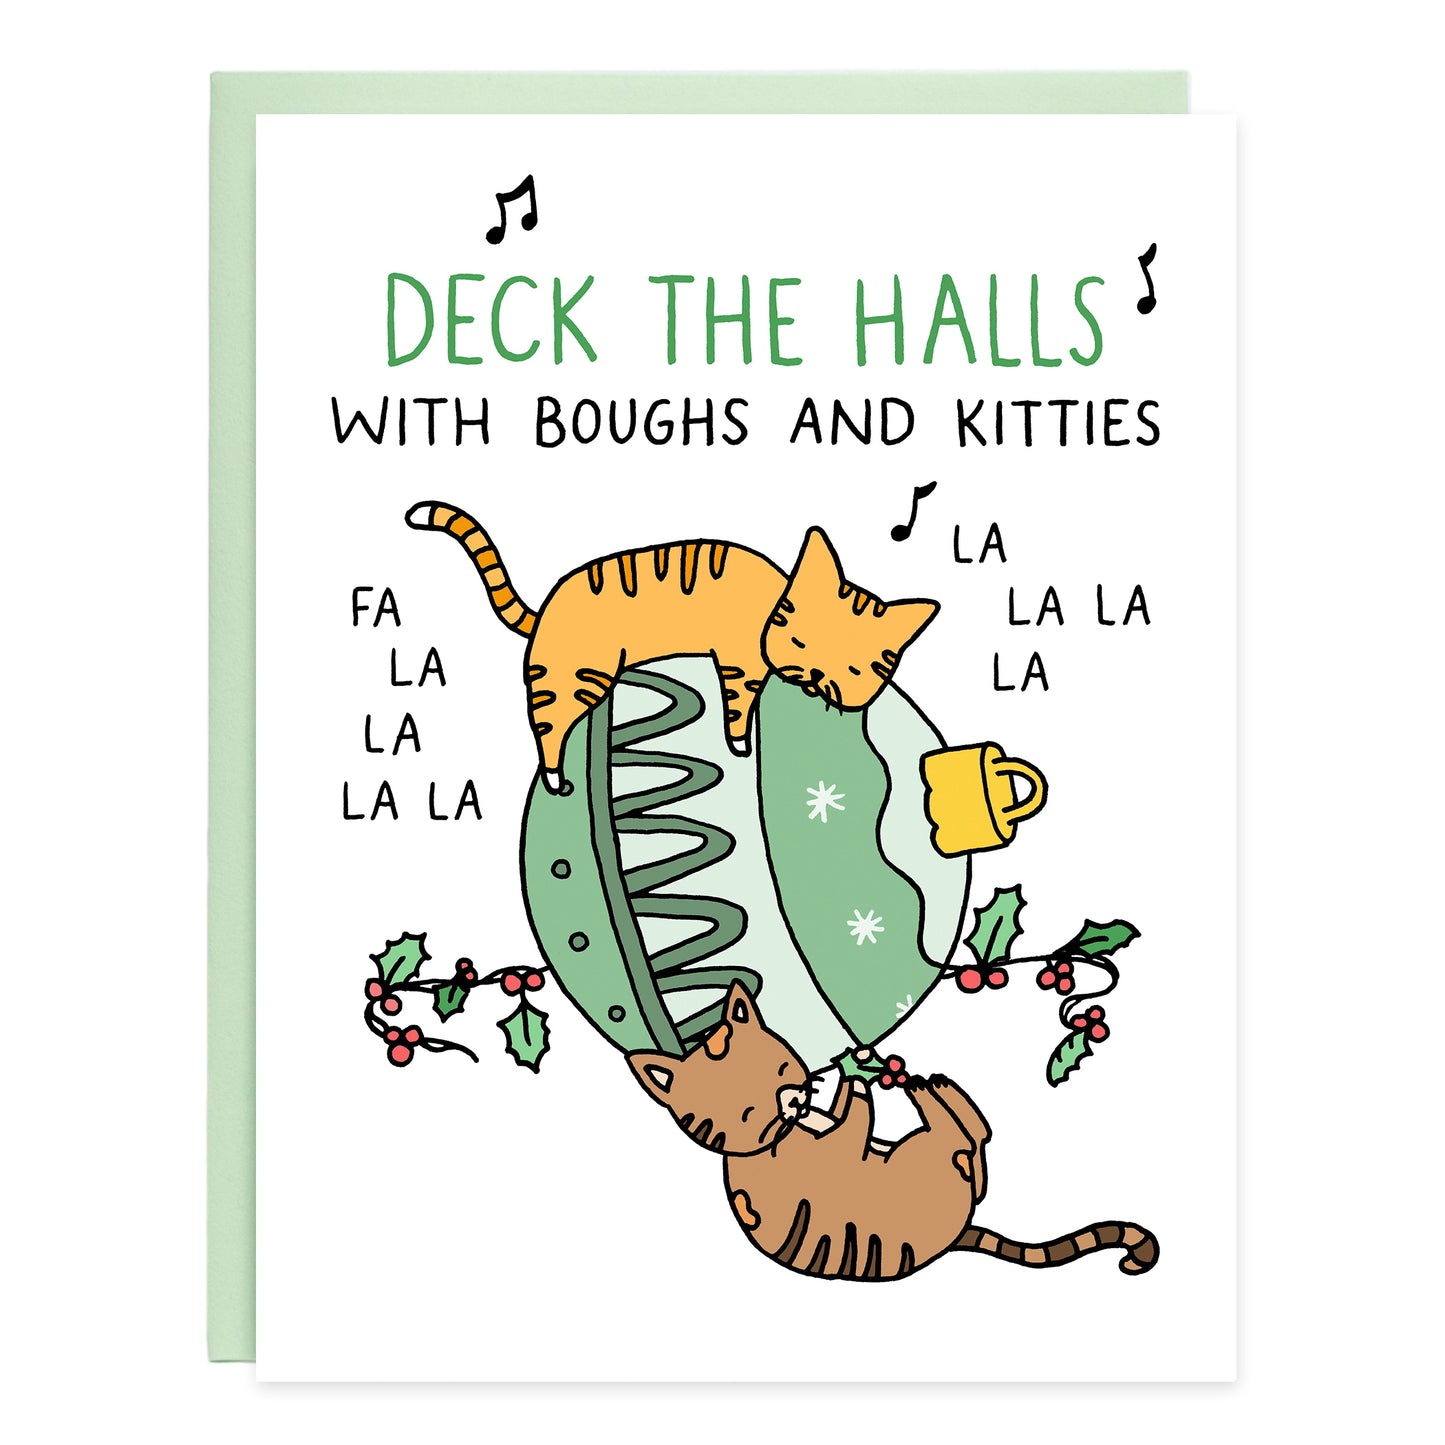 a orange tabby cat sleeping on top hugging a large green ornament and a brown tabby on the ground playing with part of a bough of holly. the card reads, deck the halls with bough and kitties